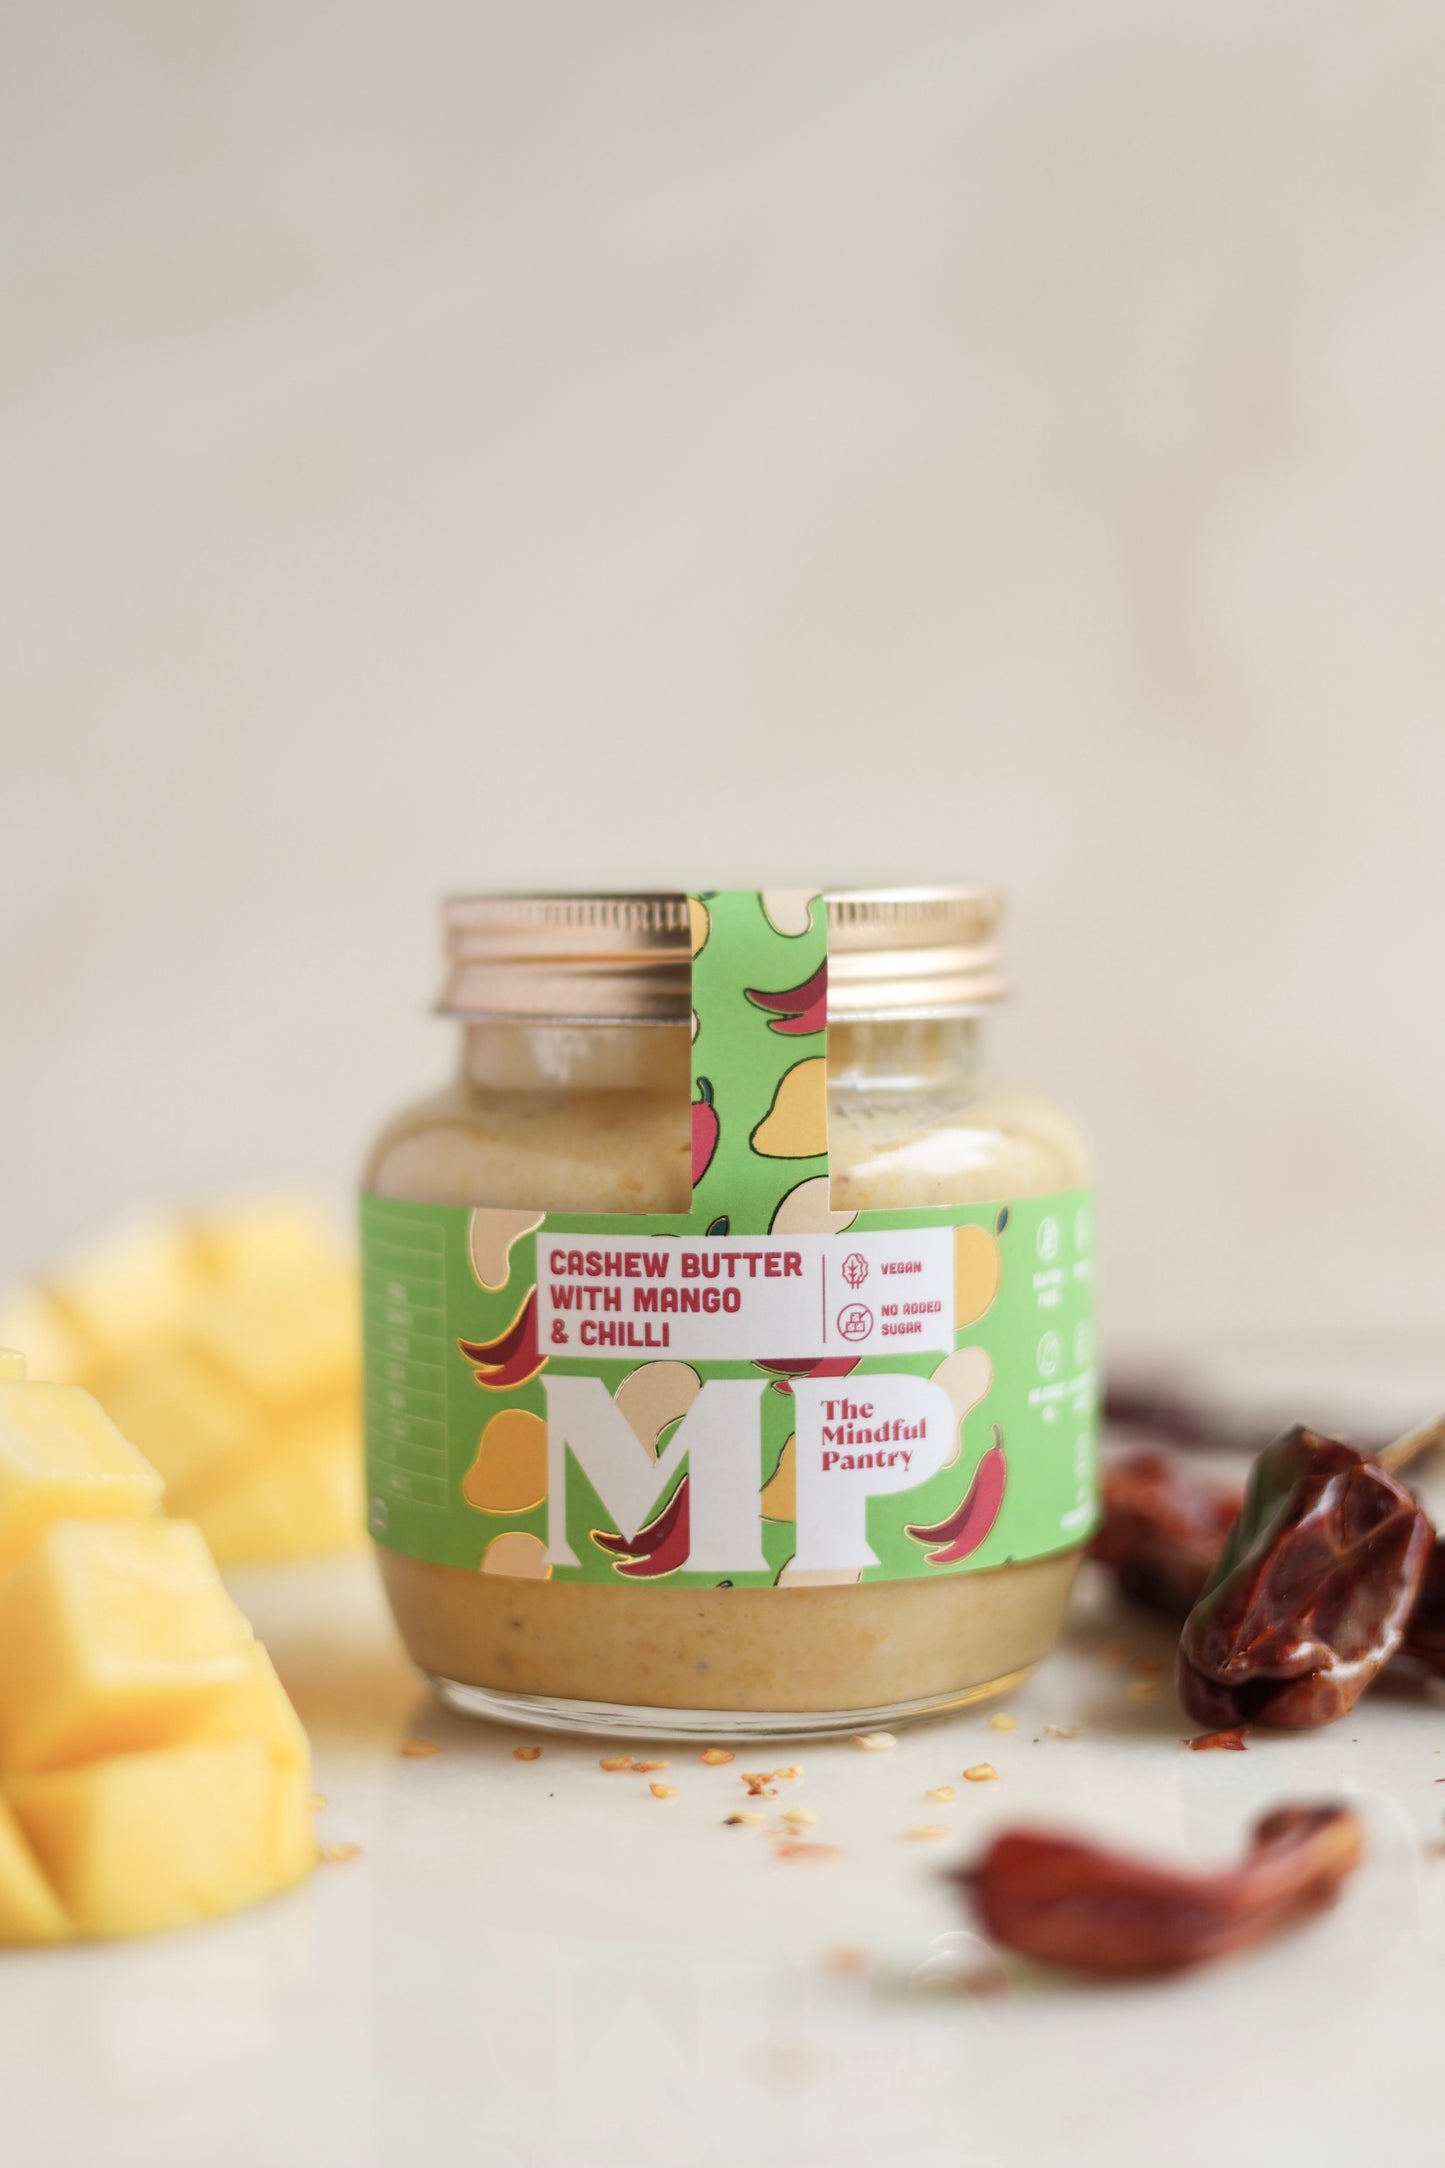 Cashew Butter with Mango and Chilli